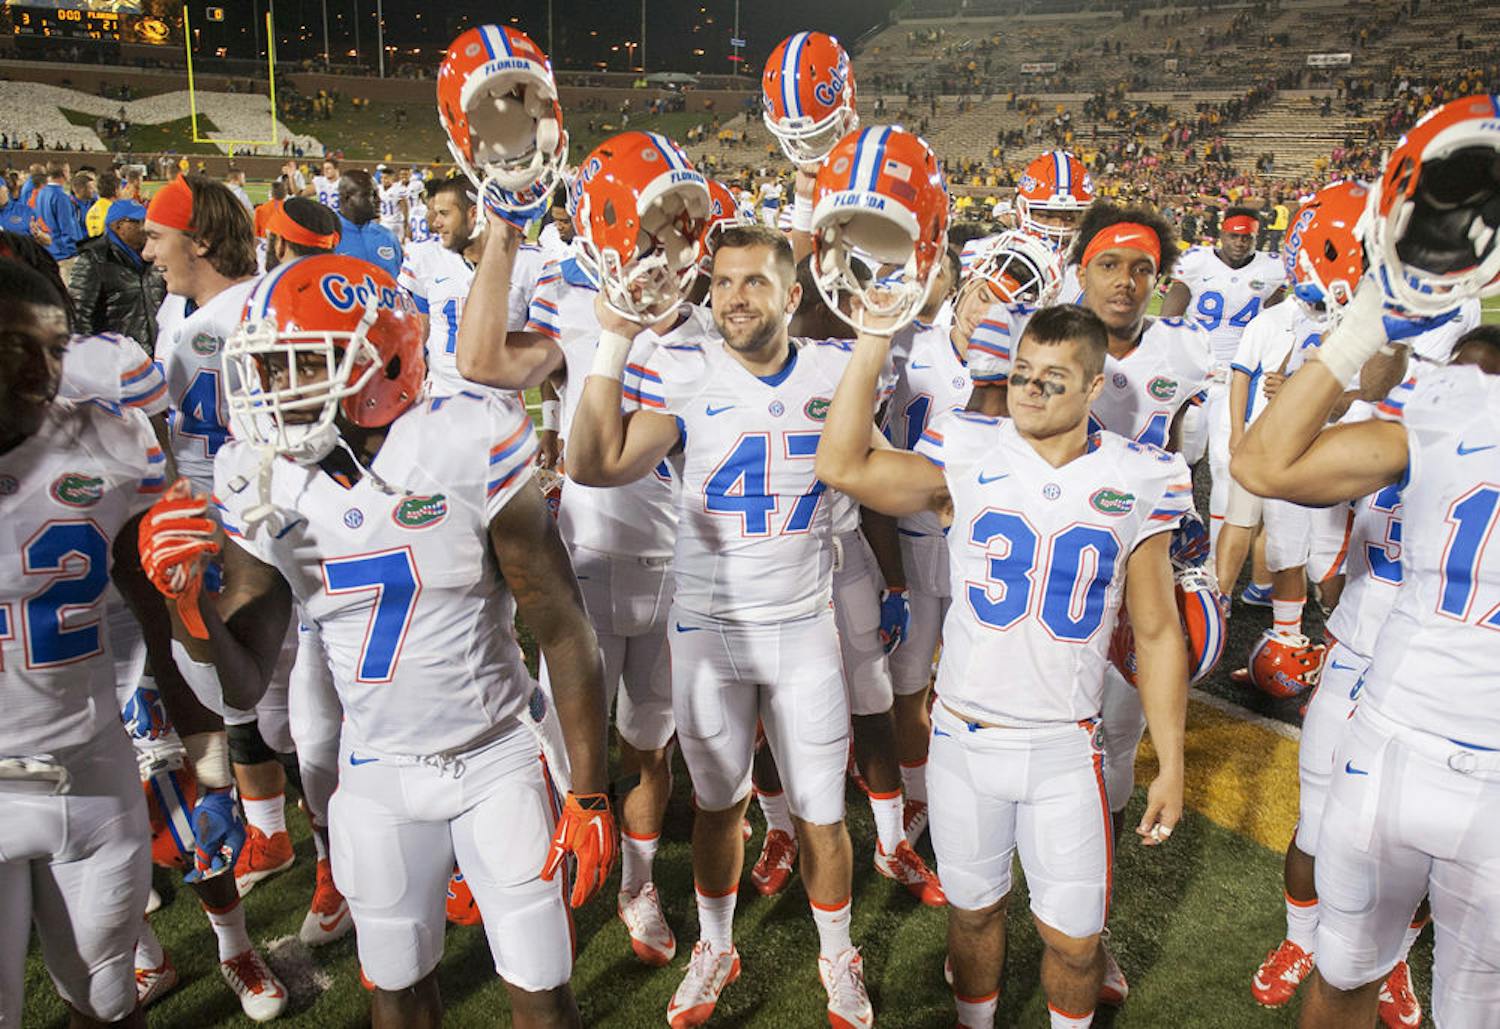 Florida teammates celebrate with fans after a 21-3 win against Missouri on Oct. 10, 2015, on Faurot Field at Memorial Stadium in Columbia, Missouri.